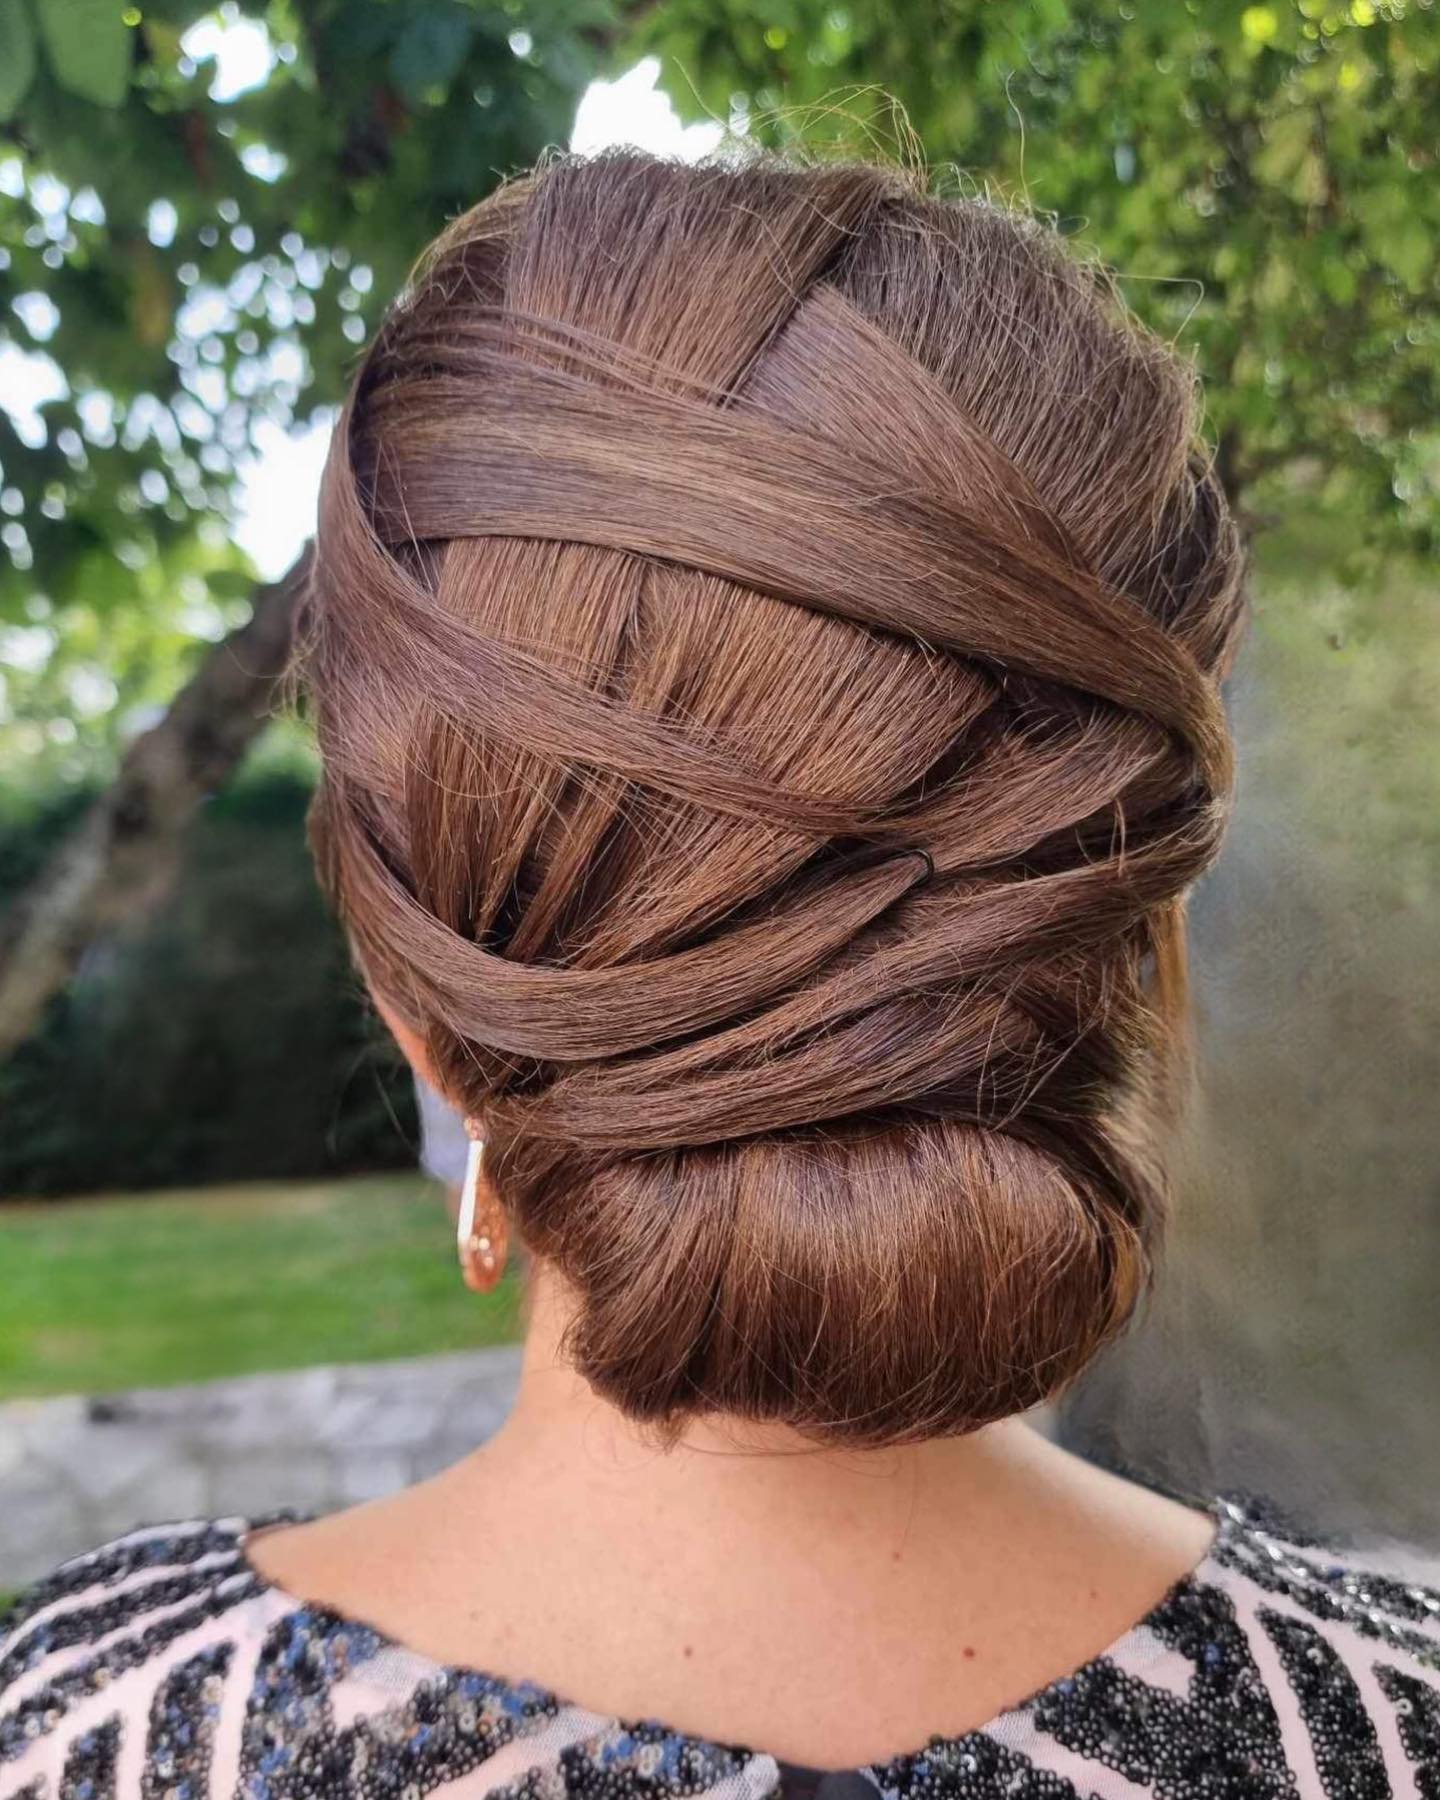 Weaved Basket Look with a Low Bun 